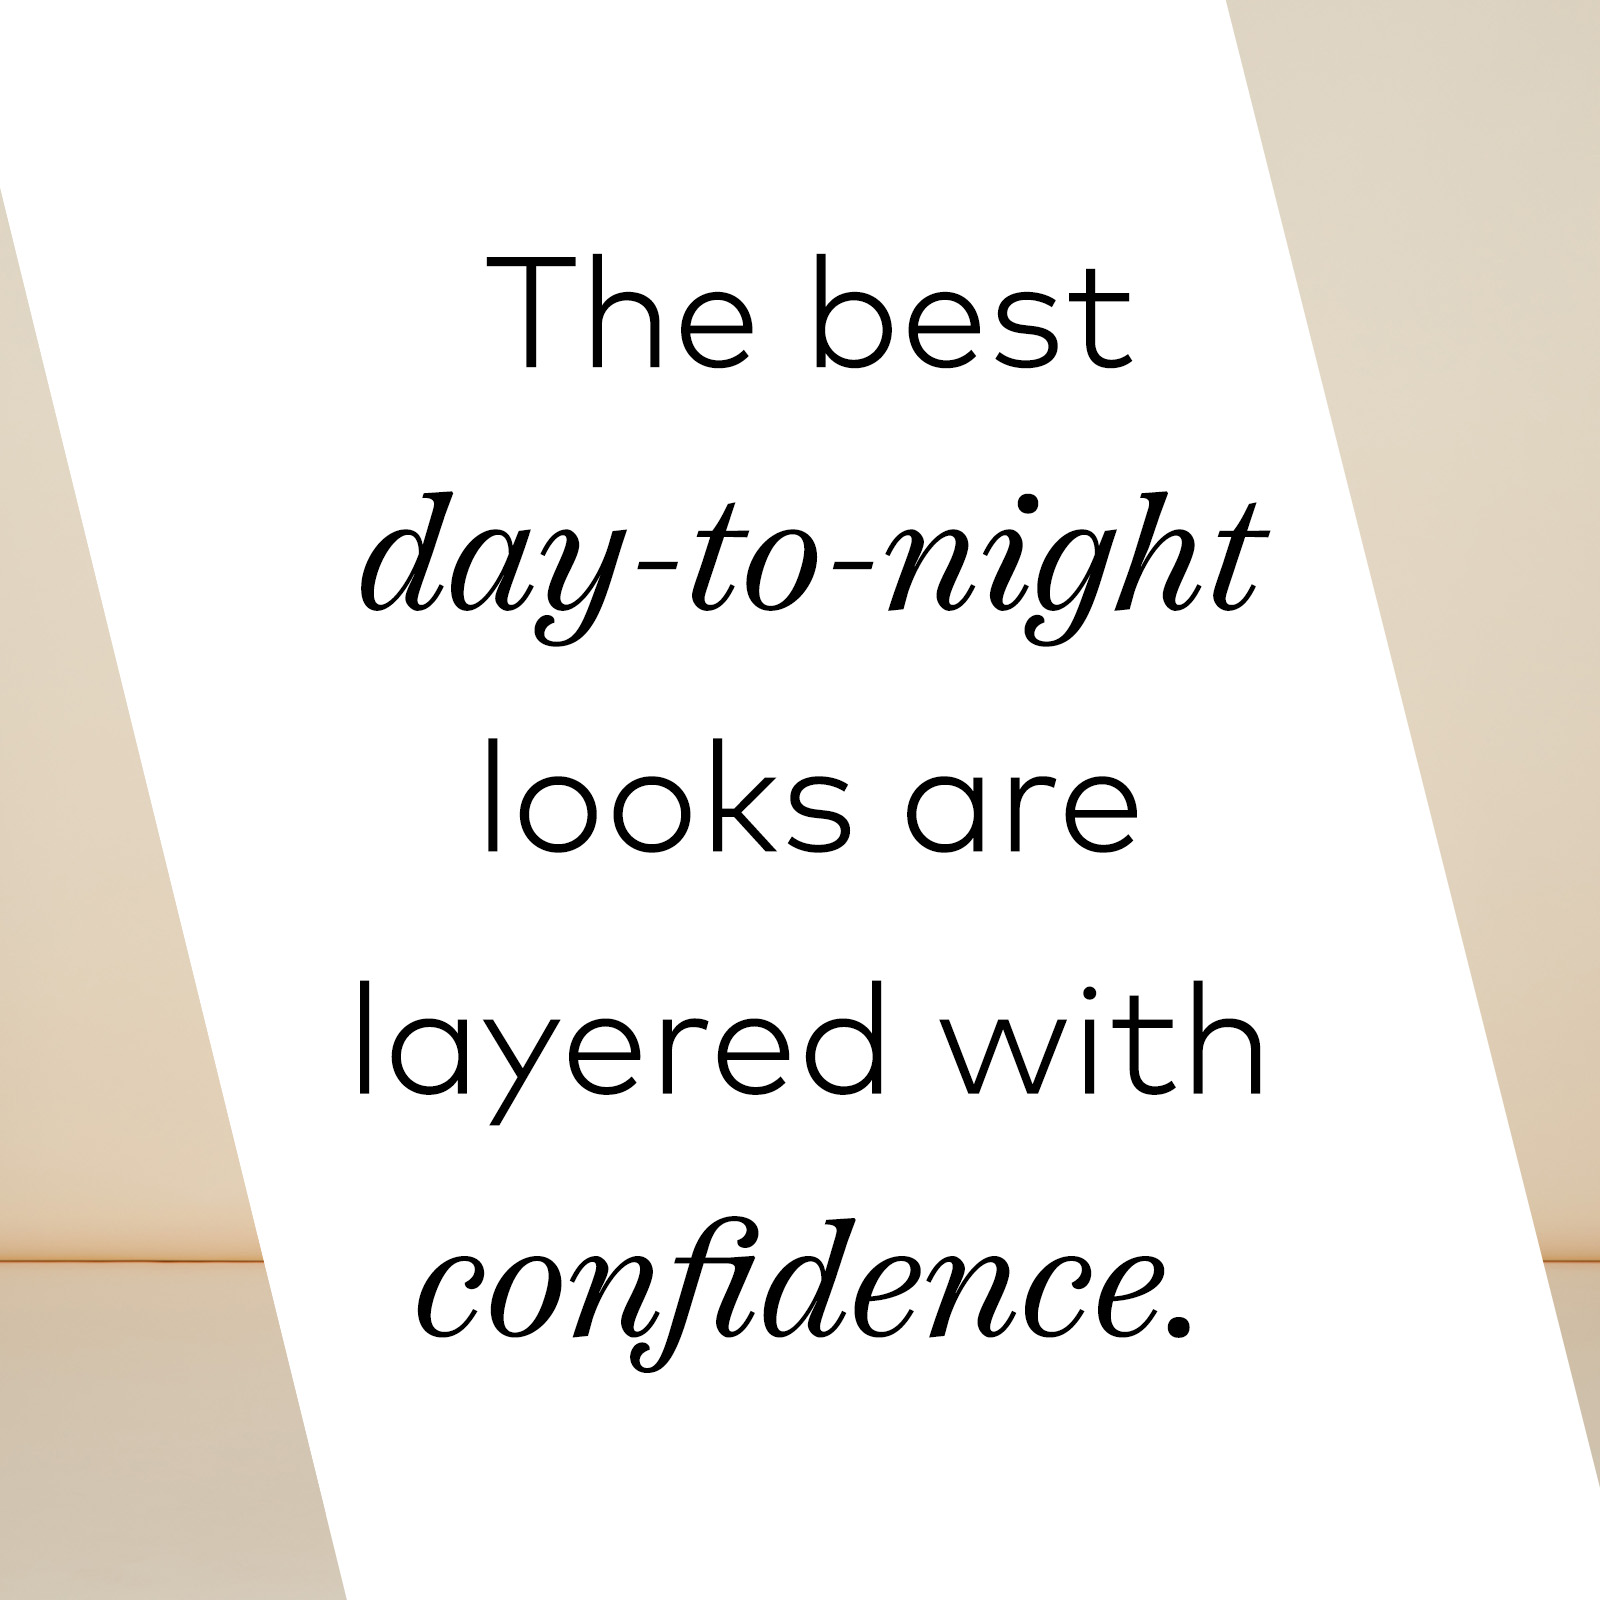 The best day-to-night looks are layered with confidence.